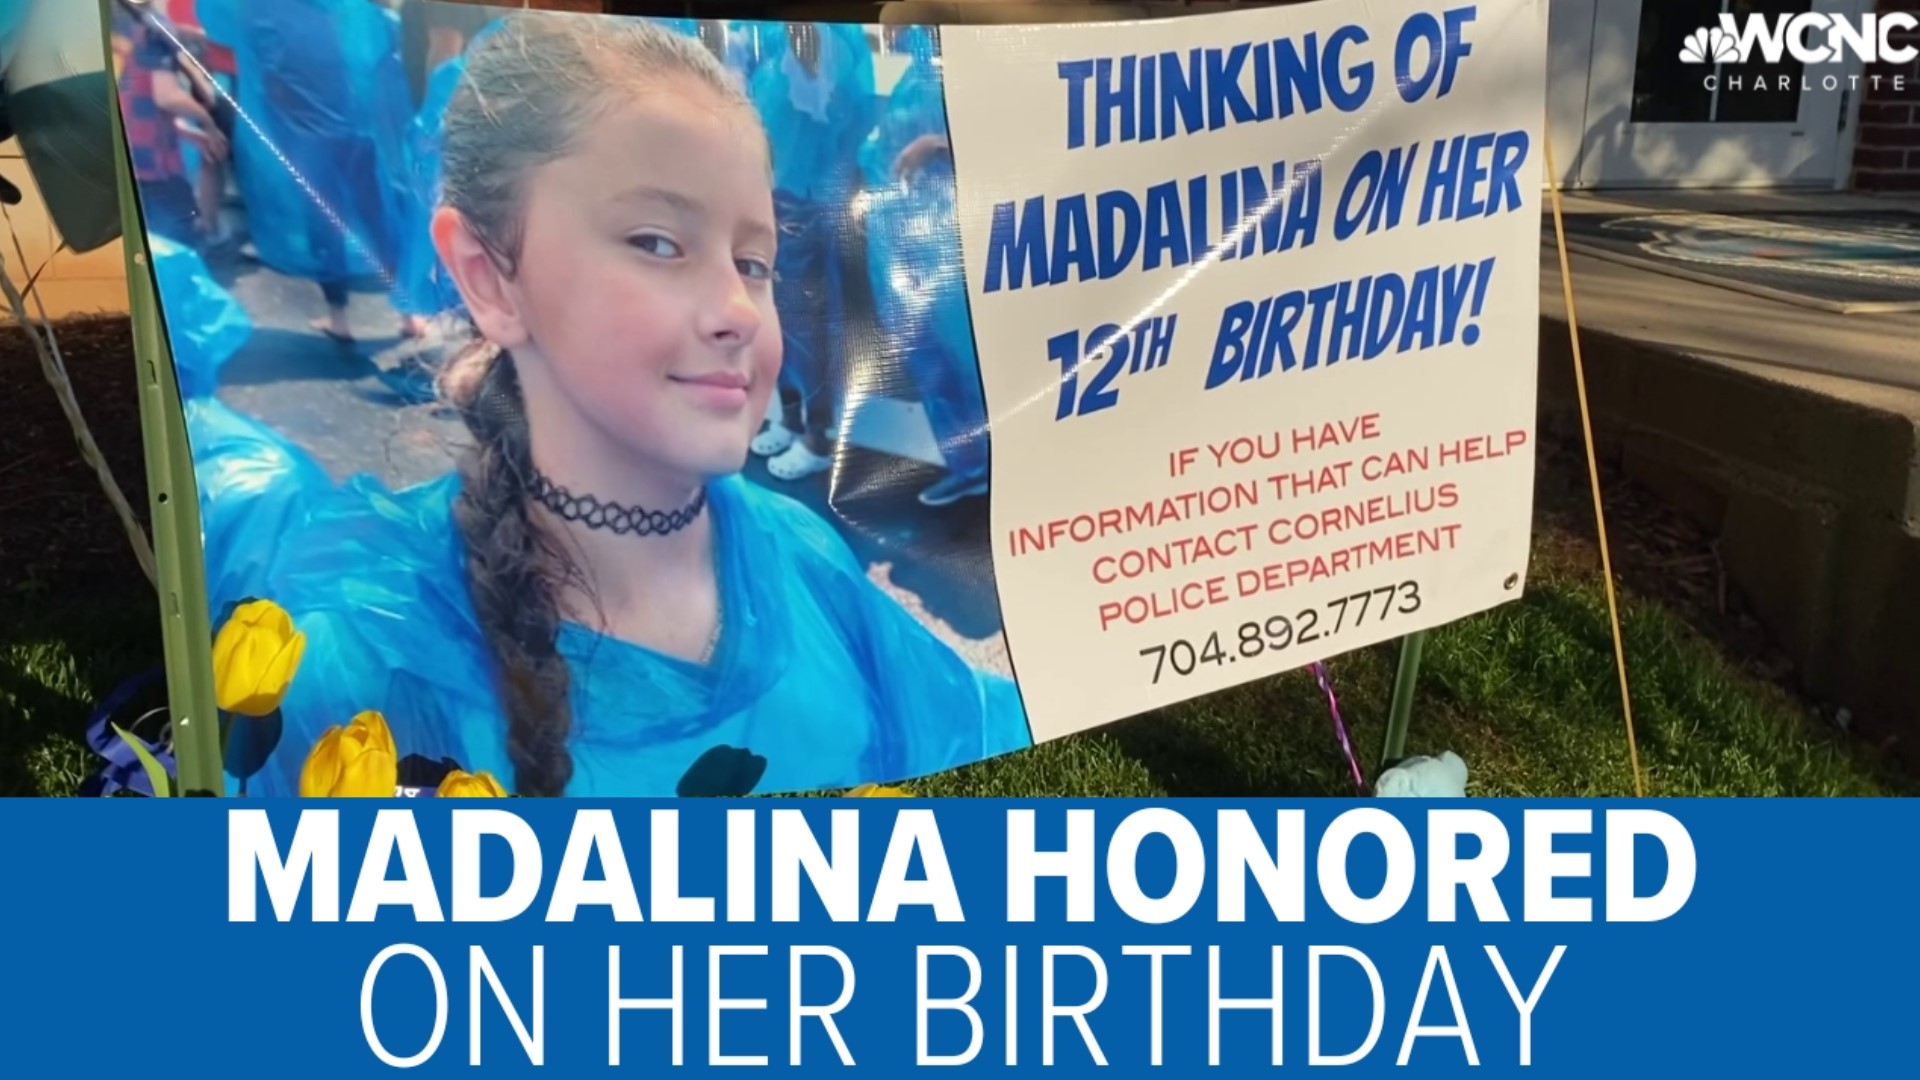 The Cornelius community is still searching for Madalina Cojocari, the girl who disappeared in November at the age of 11.